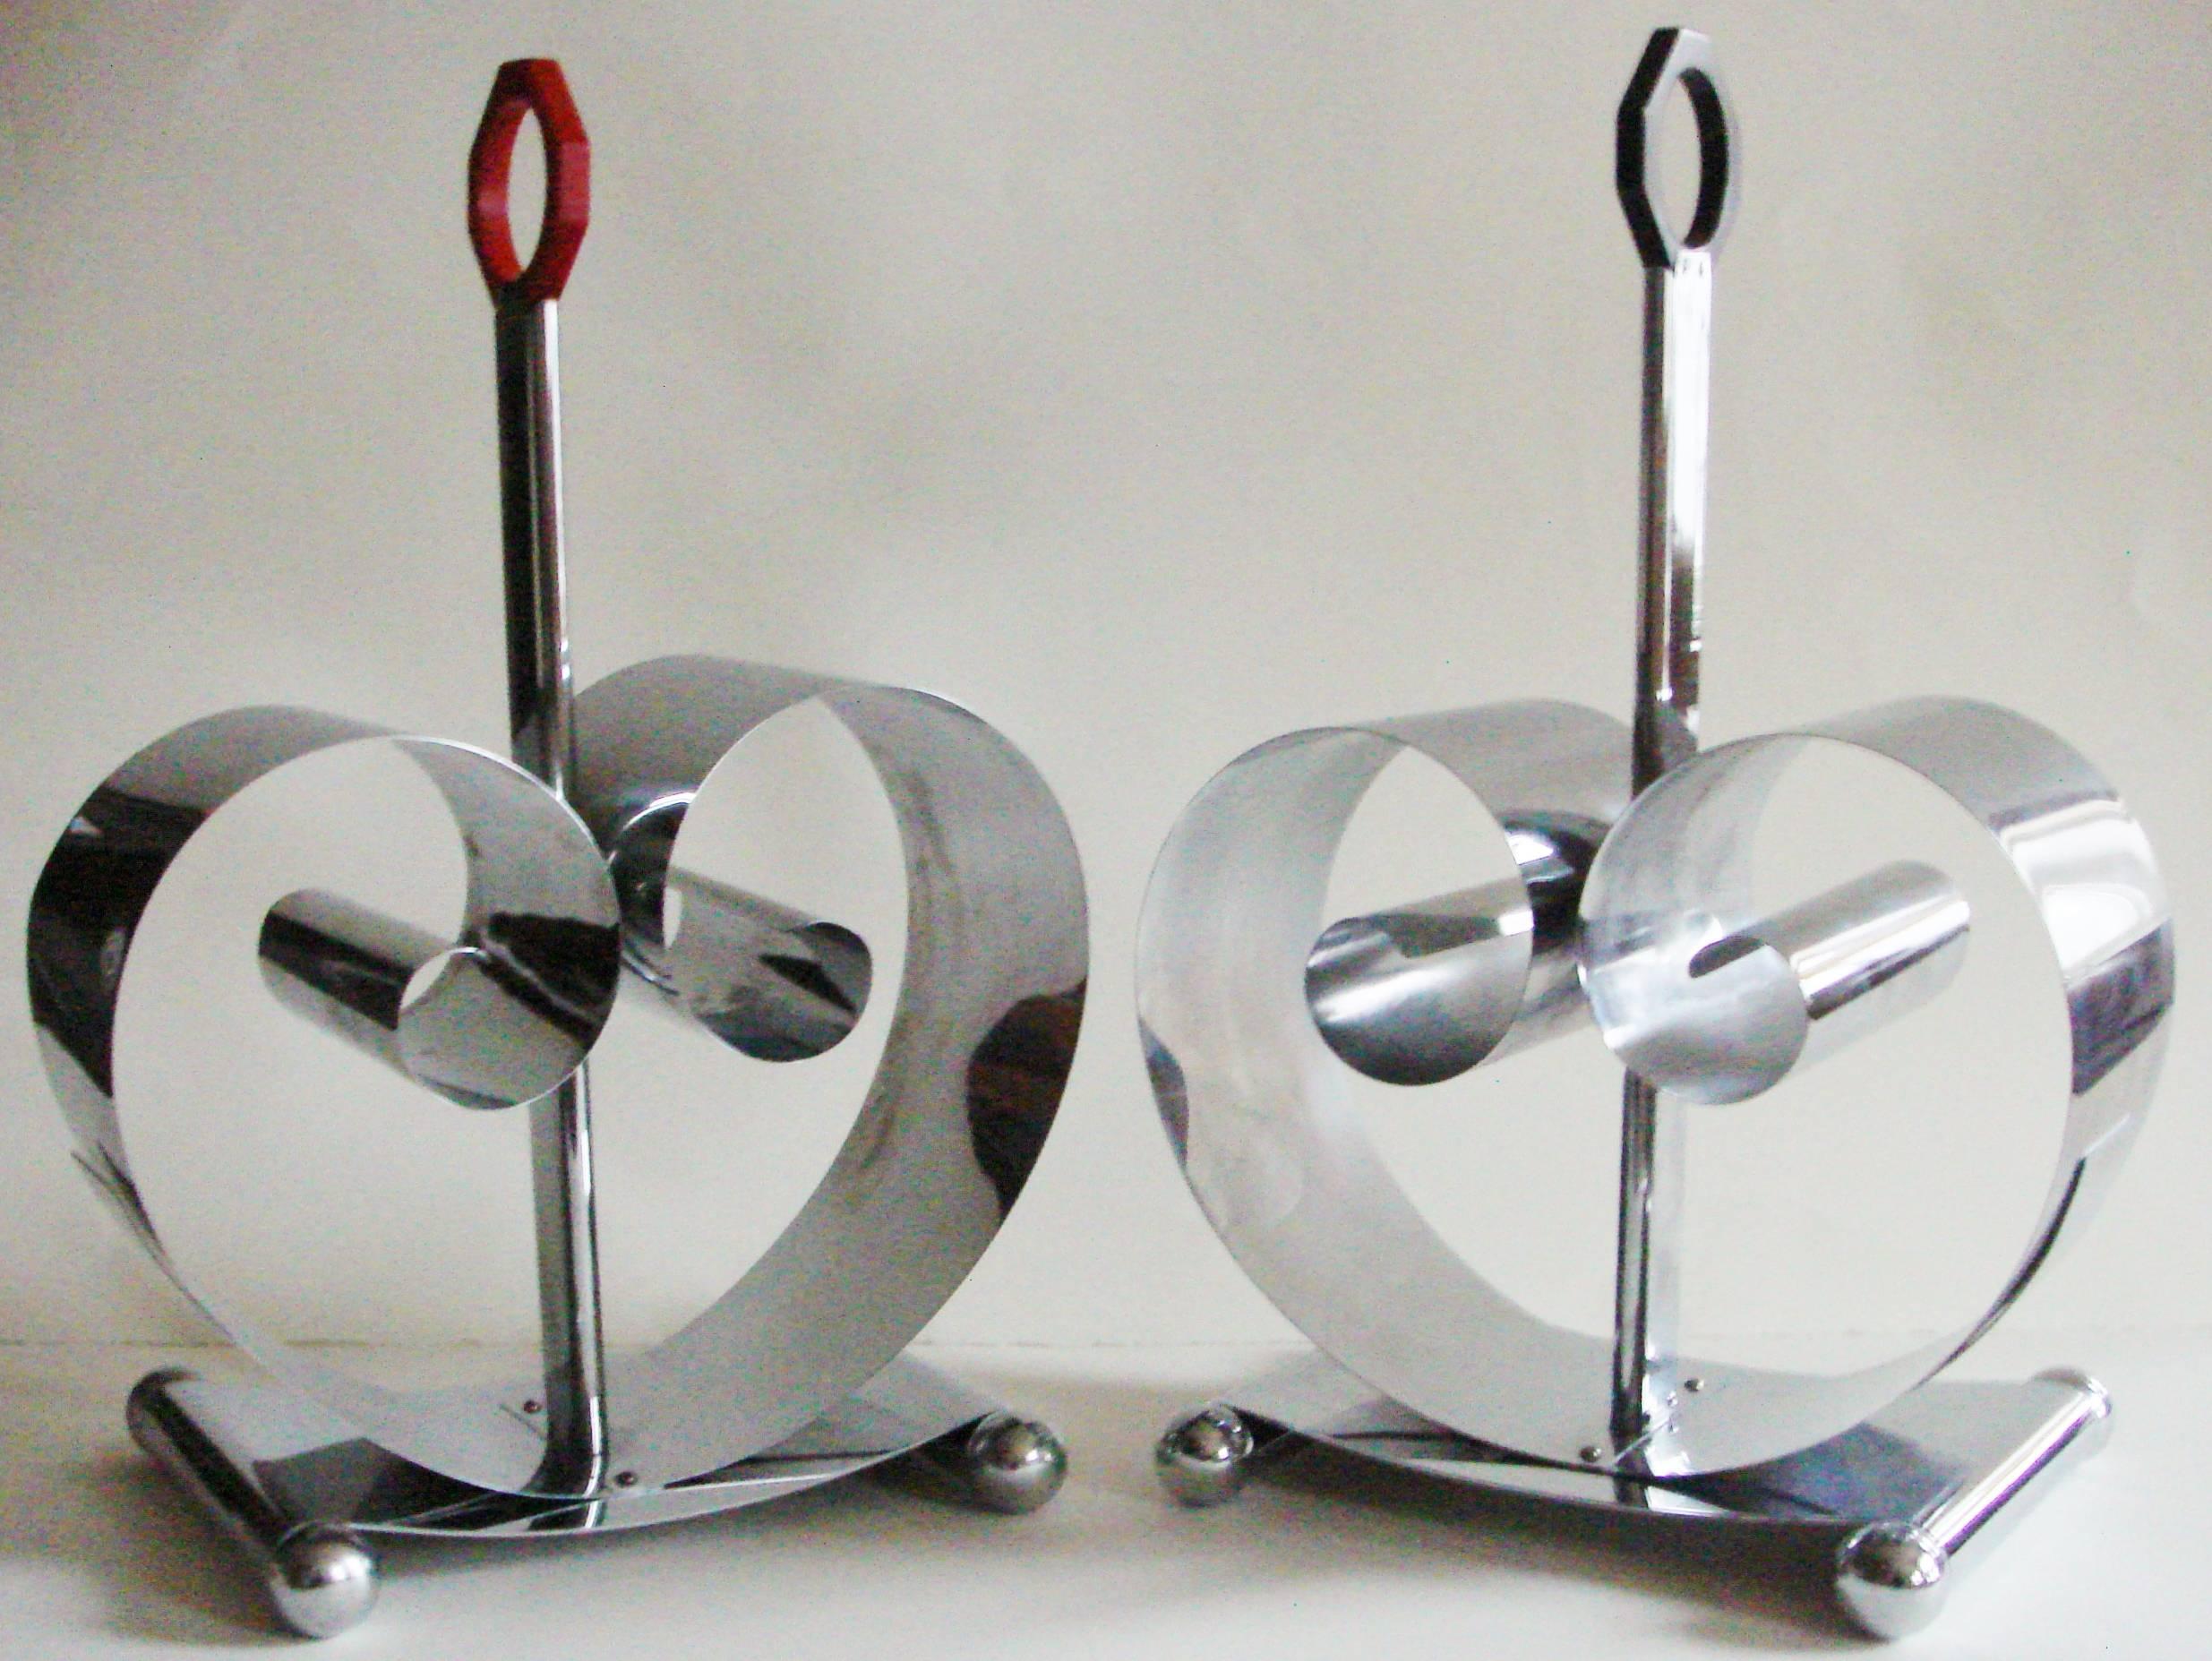 This stunning pair of American Art Deco chrome with red and black bakelite handles magazine racks were designed in 1934 by Fred D.Farr for Revere Copper and Brass Inc. of Rome, NY and appeared in their 1935 catalogs. Both items are marked with the